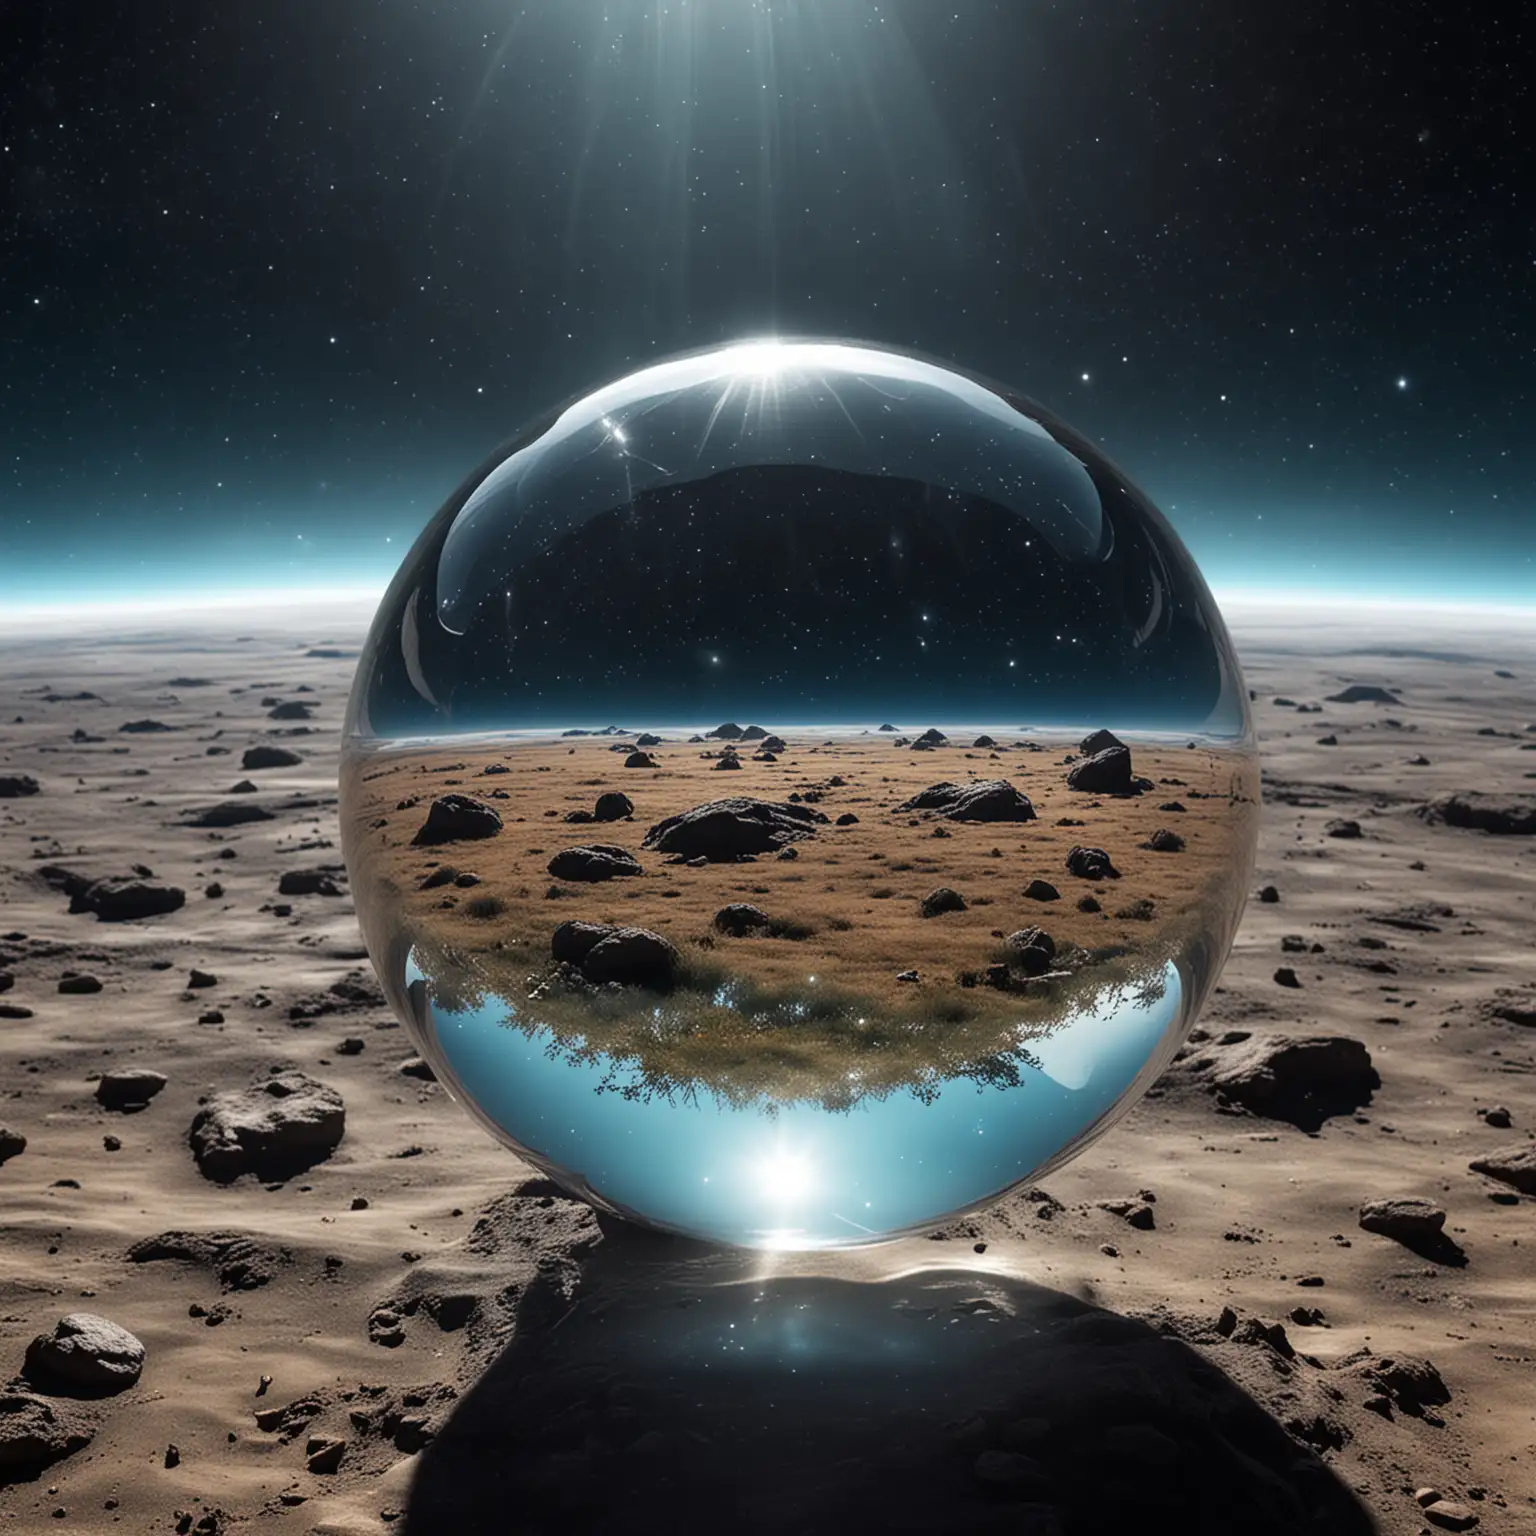 Giant-Transparent-Glass-Ball-Floating-in-Space